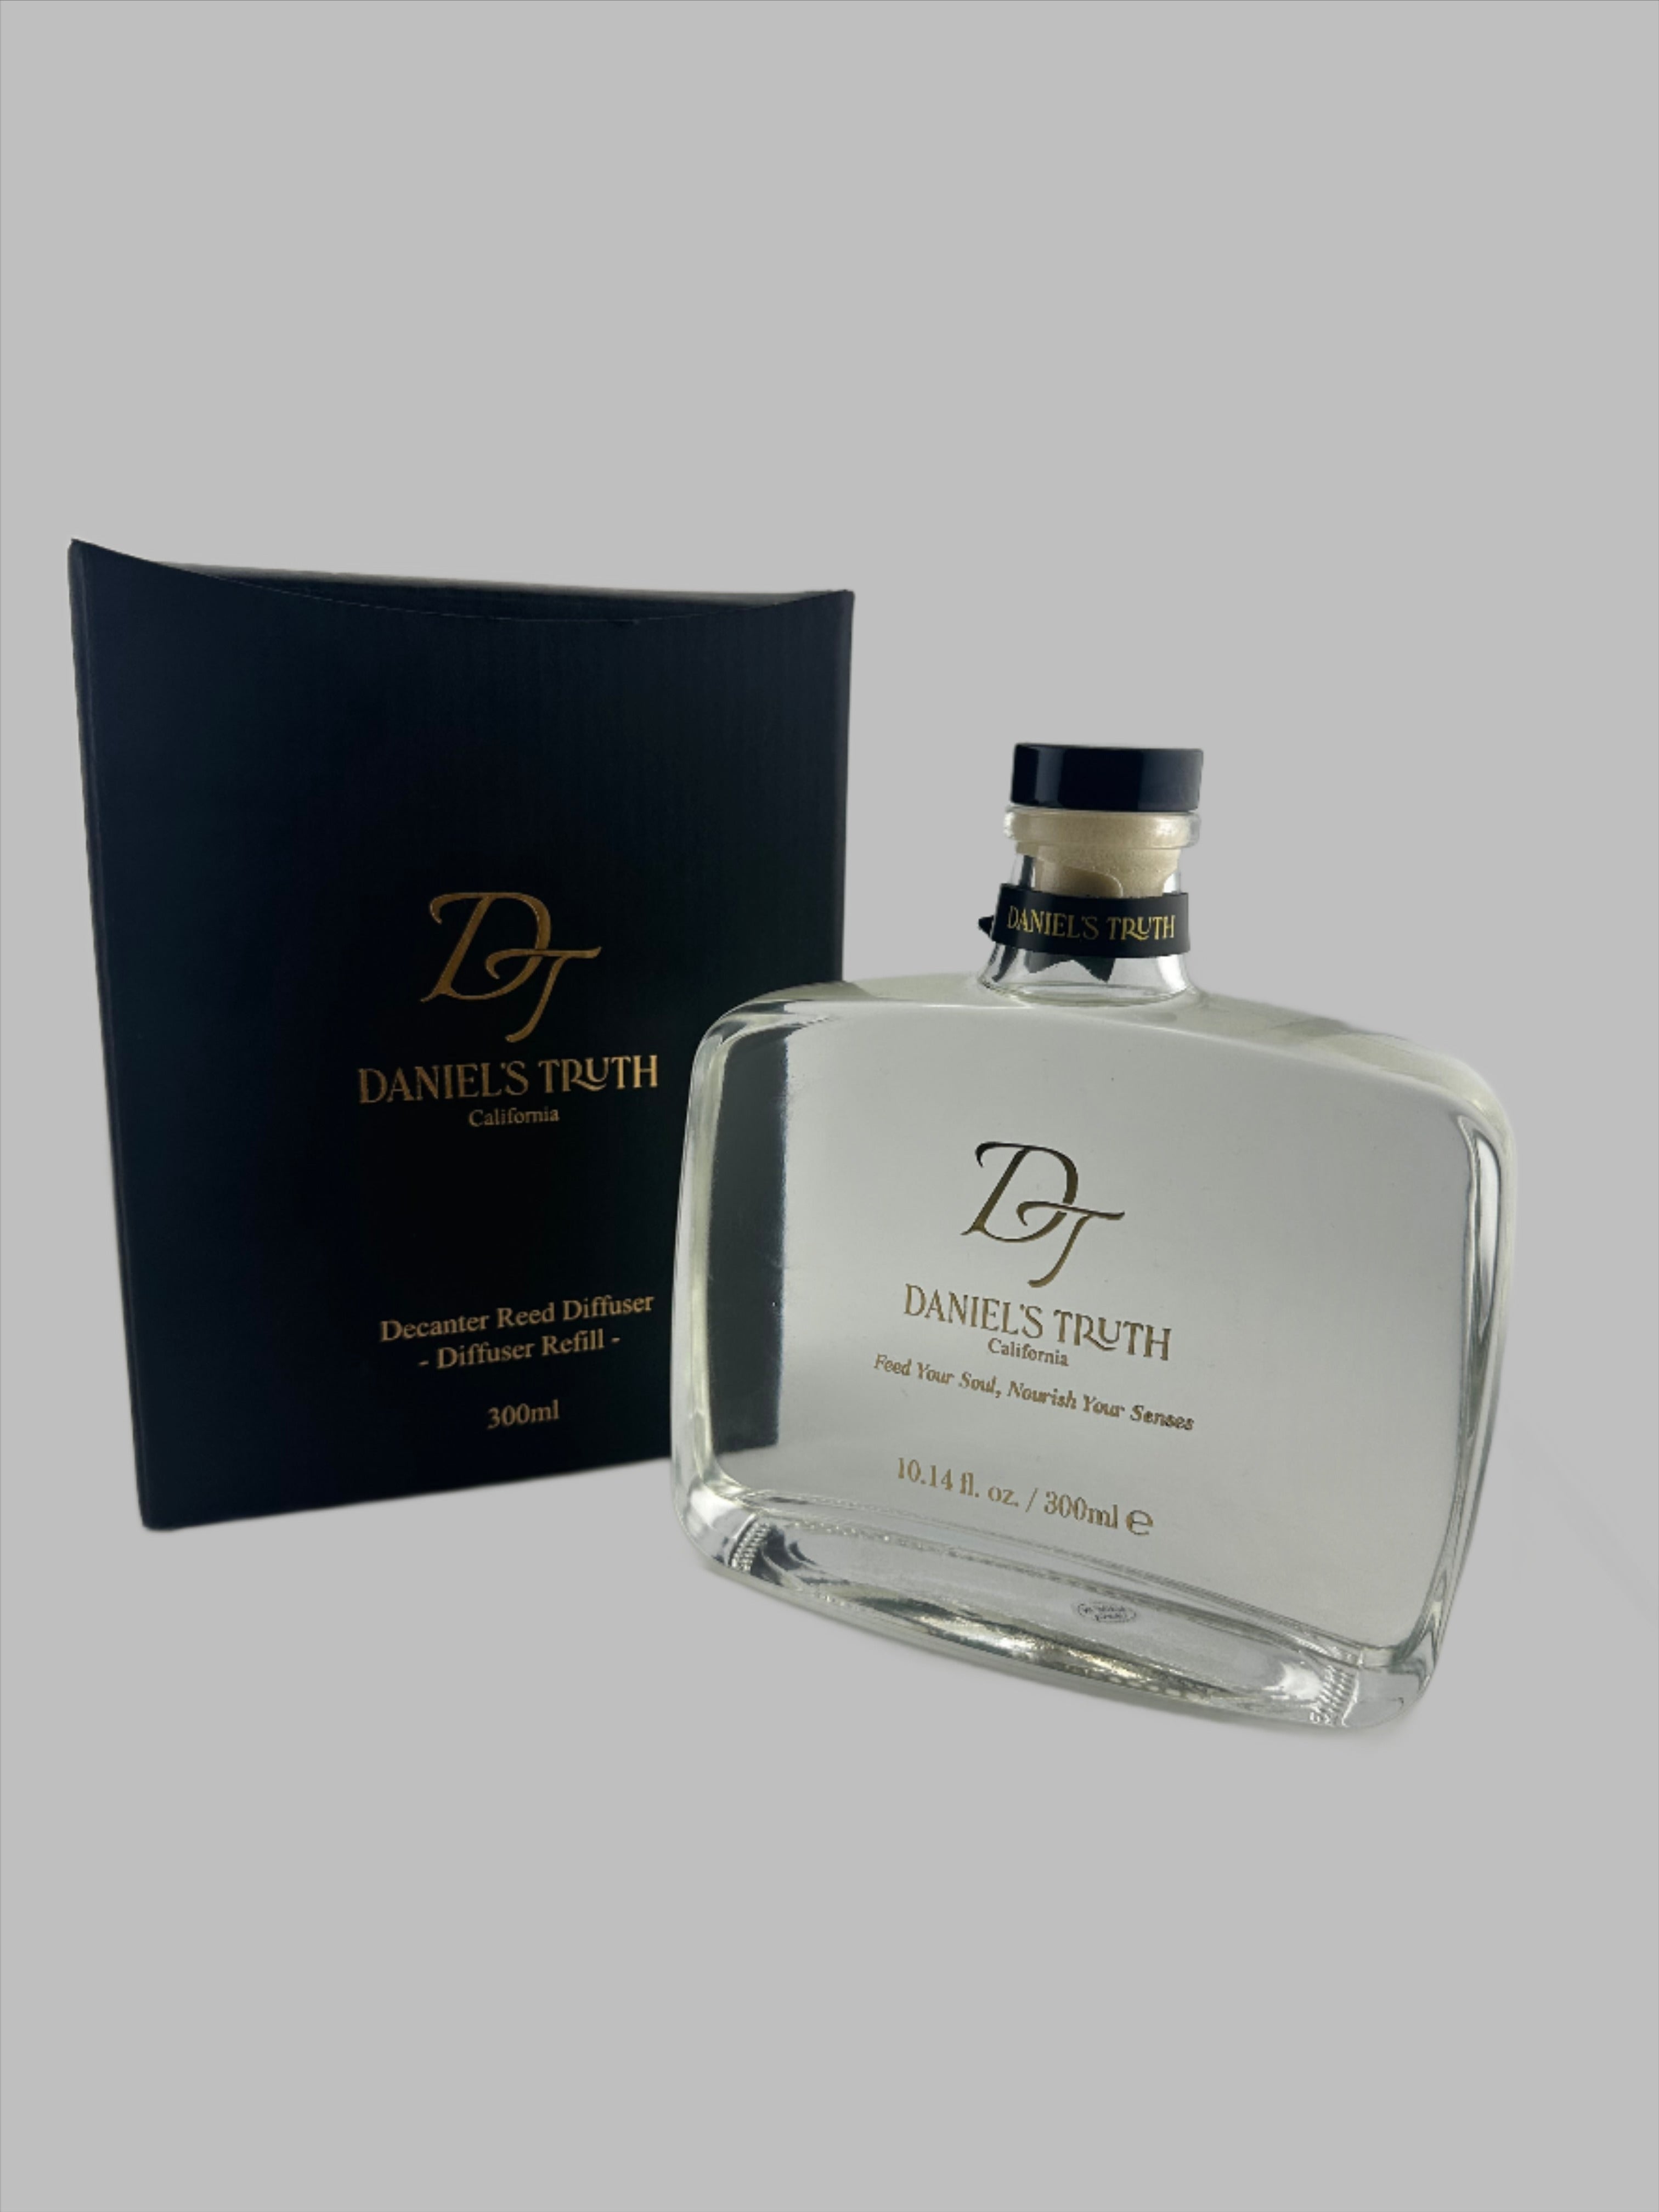 [Decanter Reed Diffuser] 300ml Refill Decanter Bombshell